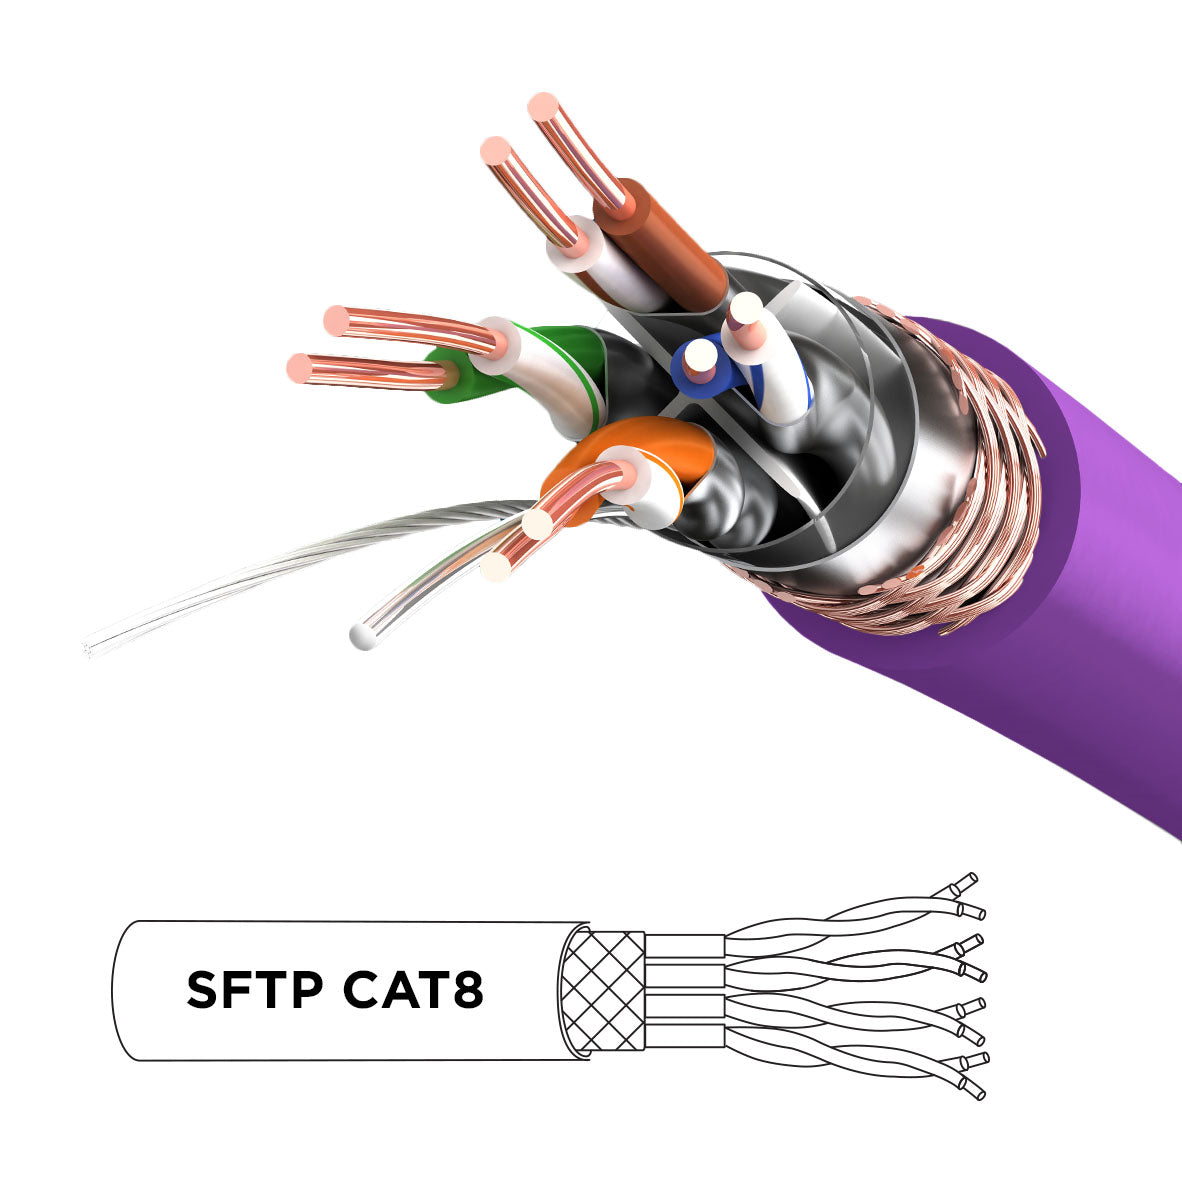 Duronic Ethernet Cable 10M High Speed CAT 8 Patch Network Shielded Lead 2GHz / 2000MHz / 40 Gigabit, CAT8 SFTP Wire, Snagless RJ45 Super-Fast Data - Purple